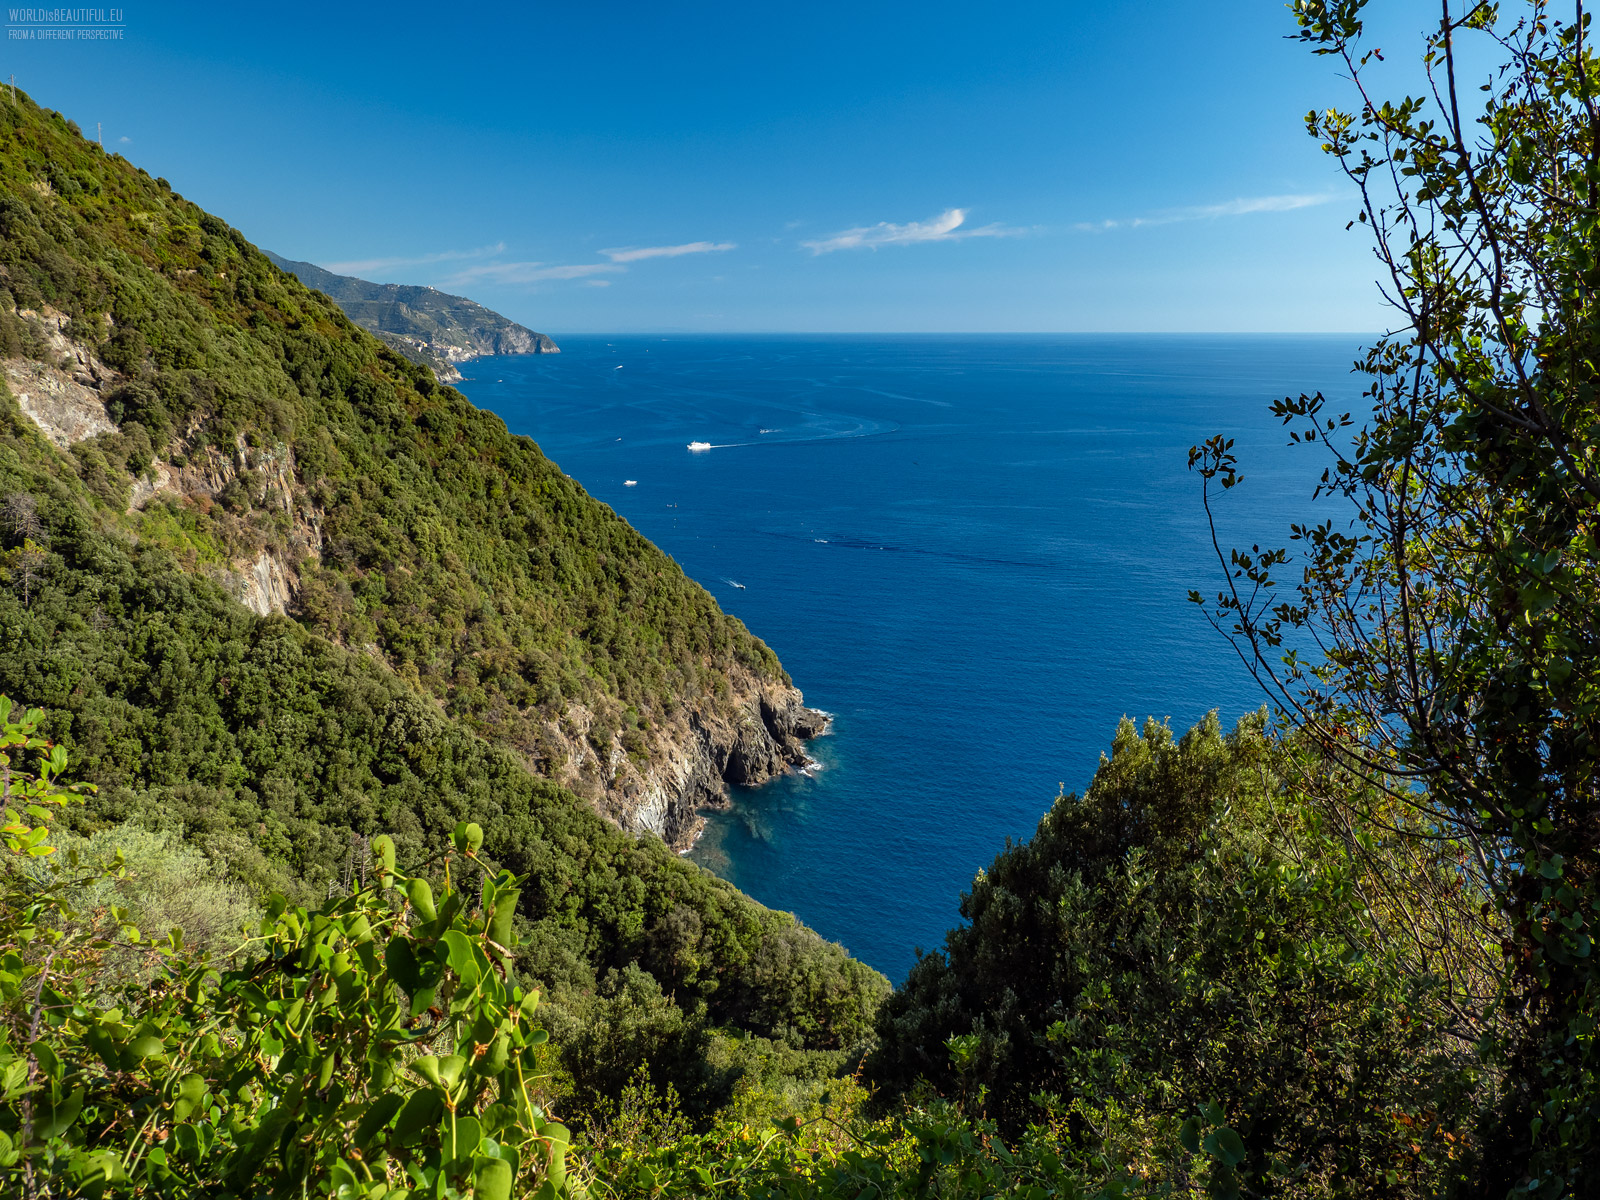 Hiking trails in the Cinque Terre